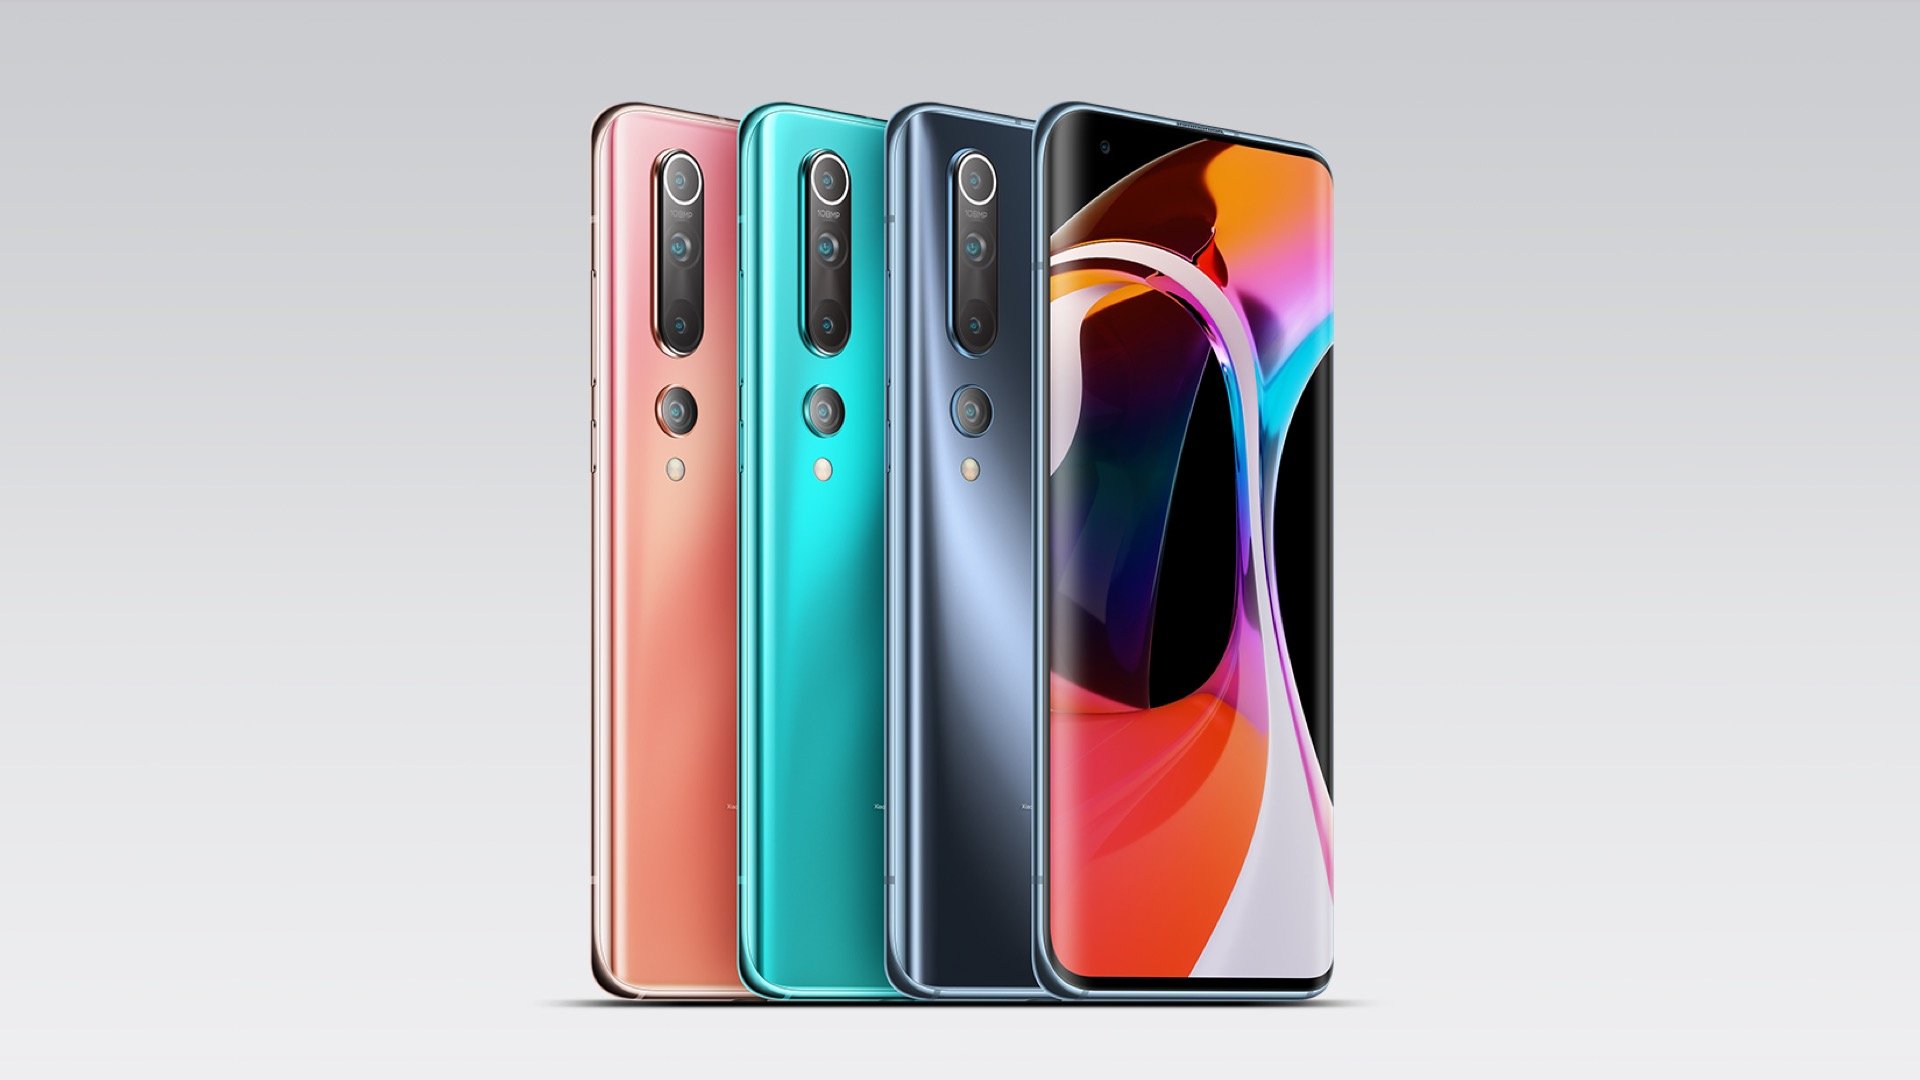 The Mi 10 Pro might have helped Xiaomi score a win during the smartphone downturn. (Picture: Xiaomi)